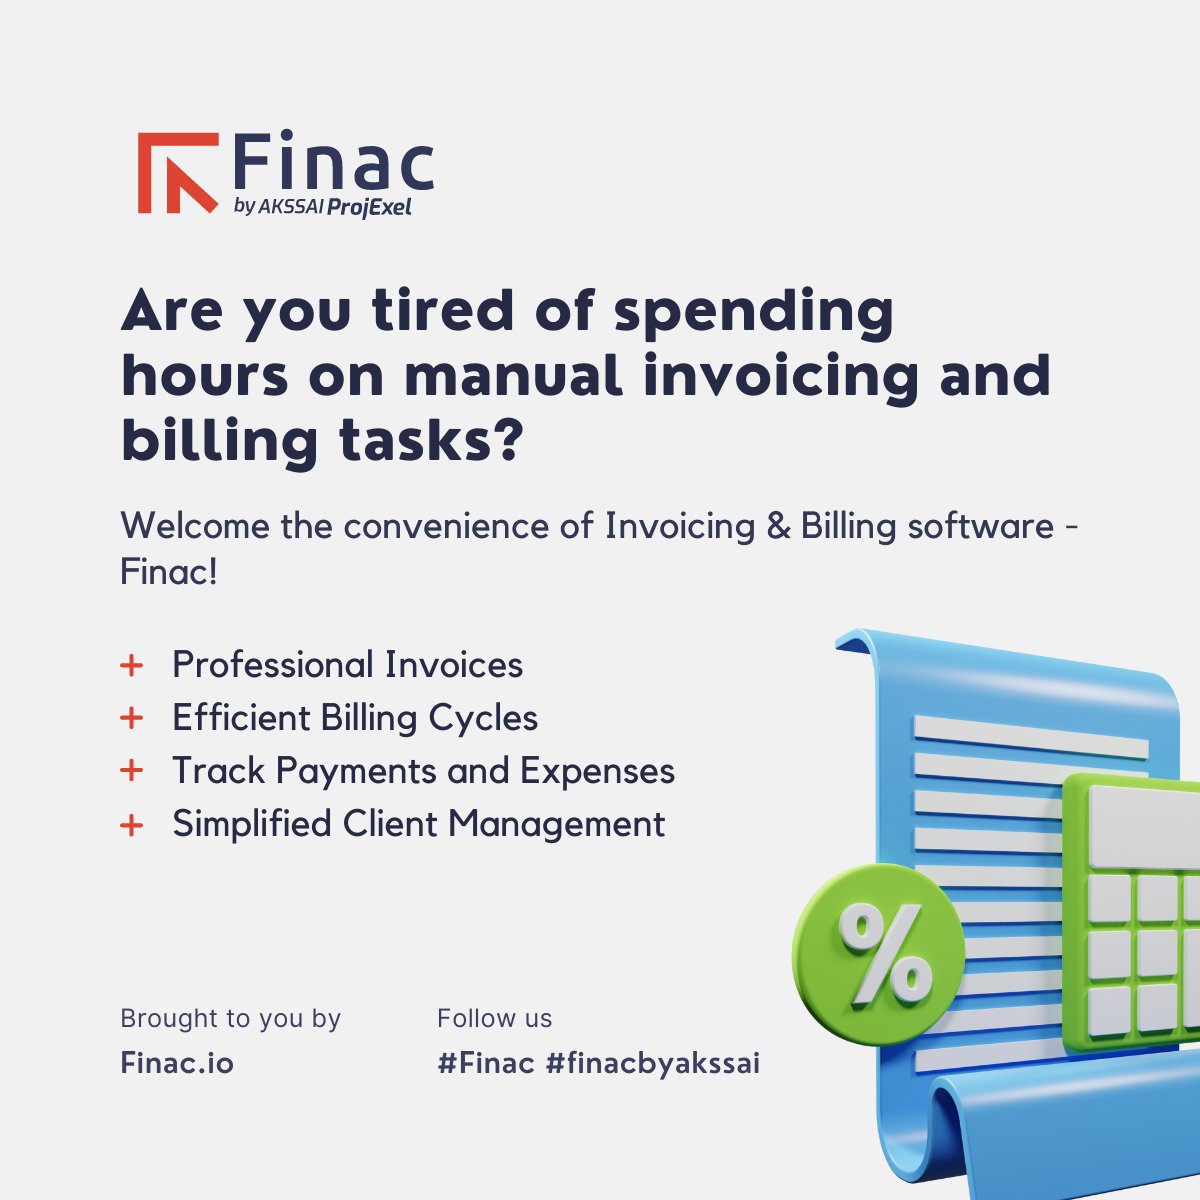 Welcome the convenience of Invoicing & Billing software - Finac!

Say goodbye to tedious paperwork and hello to streamlined operations with Finac.

#Finac #InvoicingSoftware #BillingSolution #FinancialManagement #ClientManagement #accountingsoftware #finac #akssai #finacbyakssai